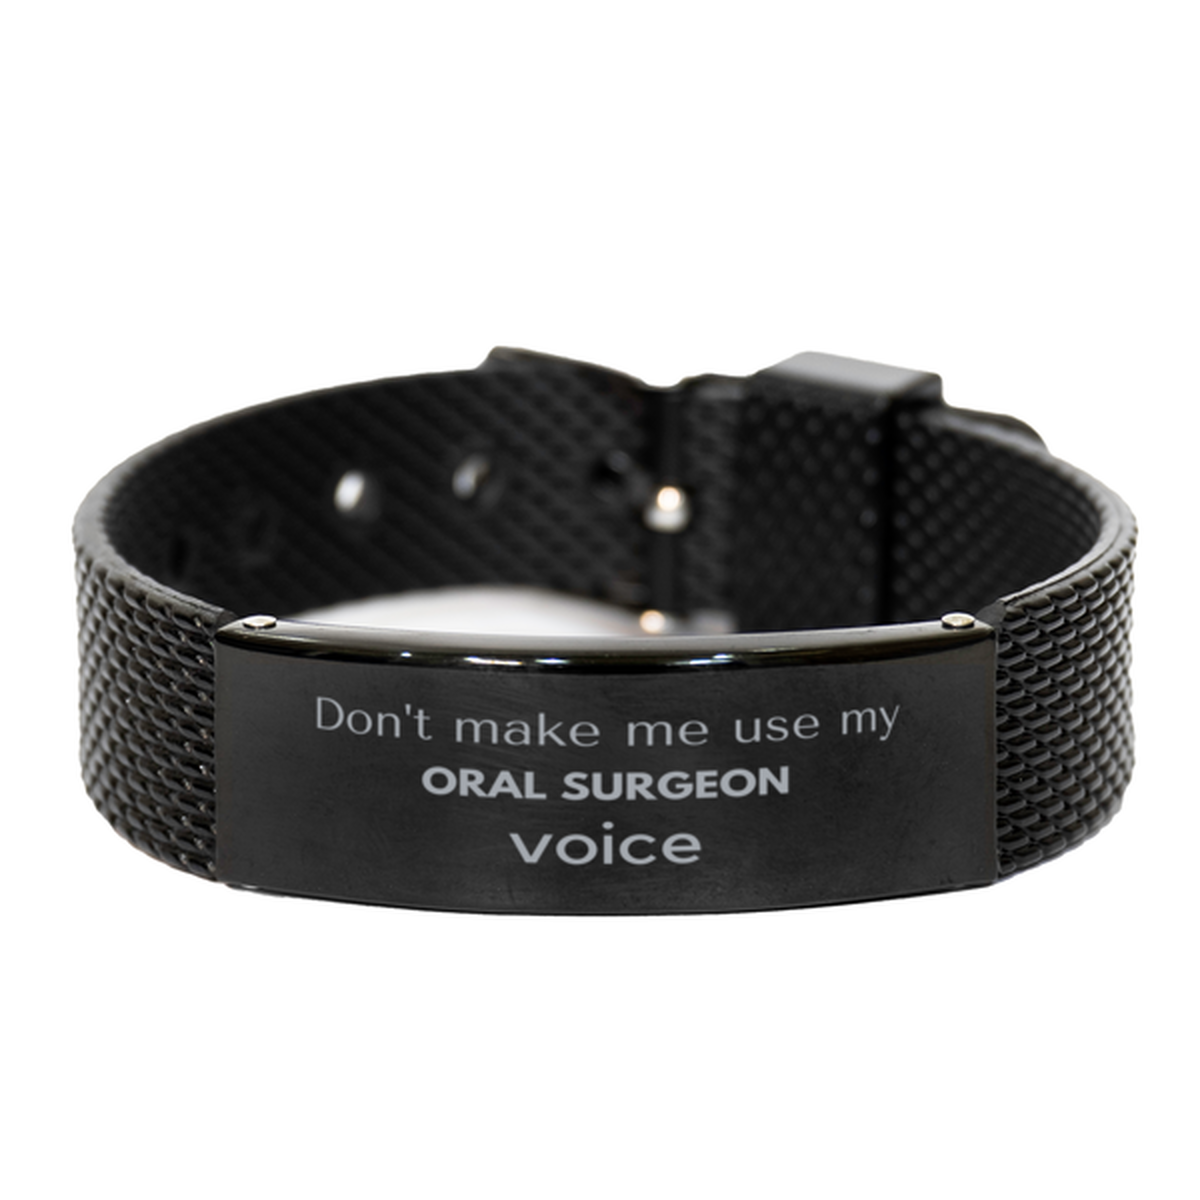 Don't make me use my Oral Surgeon voice, Sarcasm Oral Surgeon Gifts, Christmas Oral Surgeon Black Shark Mesh Bracelet Birthday Unique Gifts For Oral Surgeon Coworkers, Men, Women, Colleague, Friends